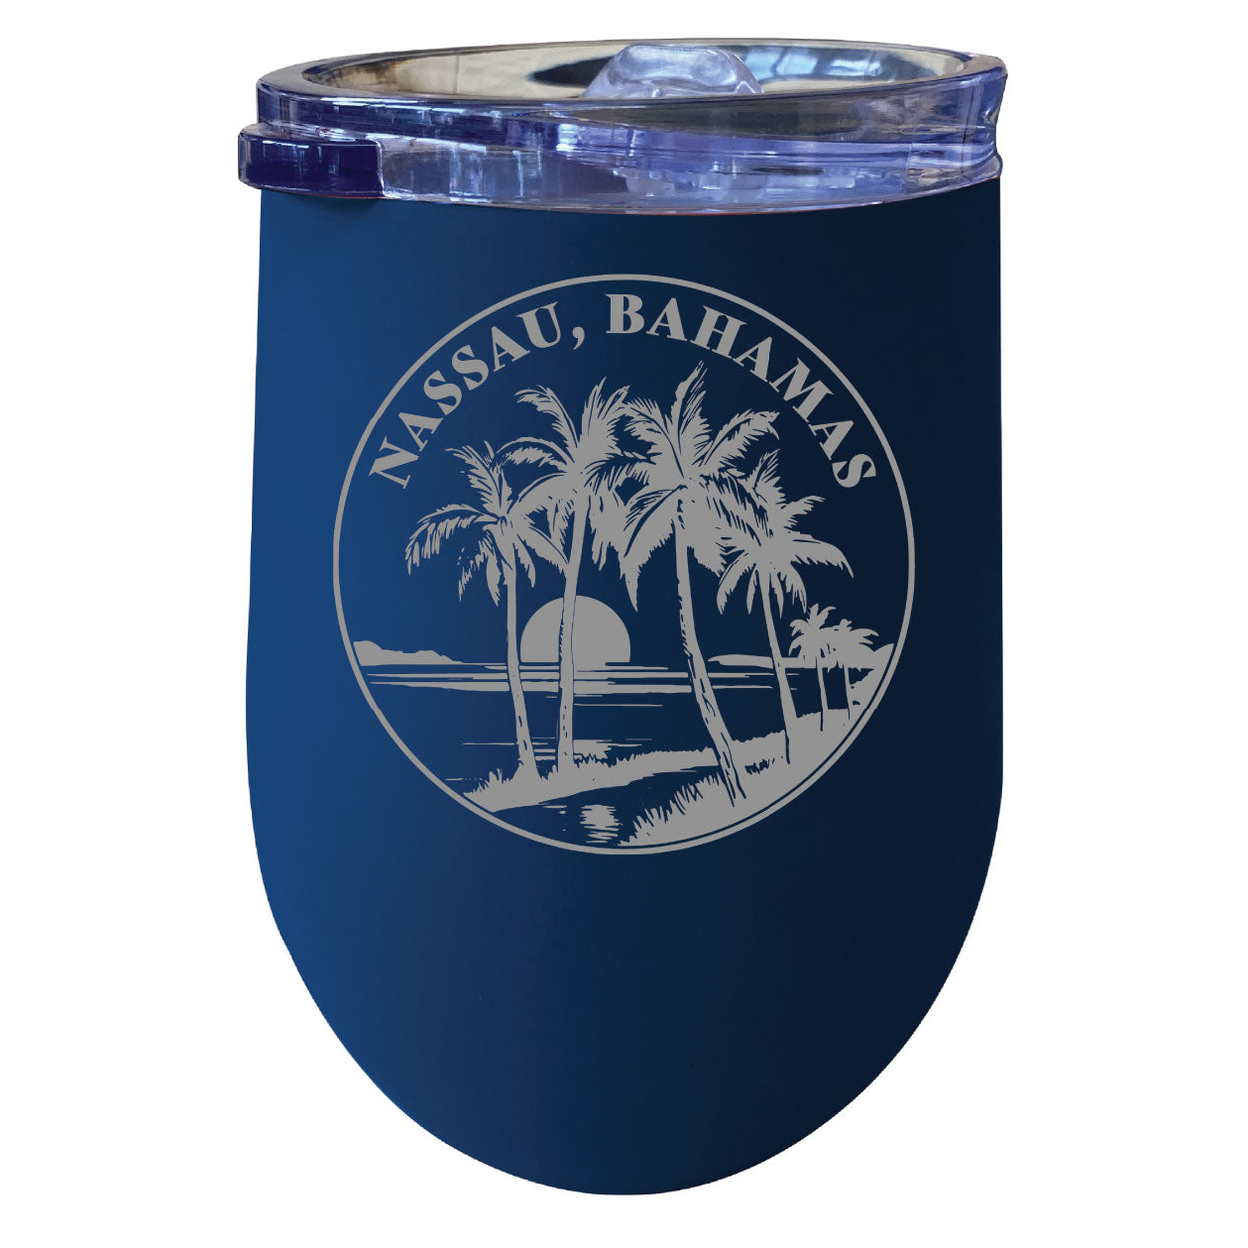 Nassau The Bahamas Souvenir 12 Oz Engraved Insulated Wine Stainless Steel Tumbler - Navy,,4-Pack